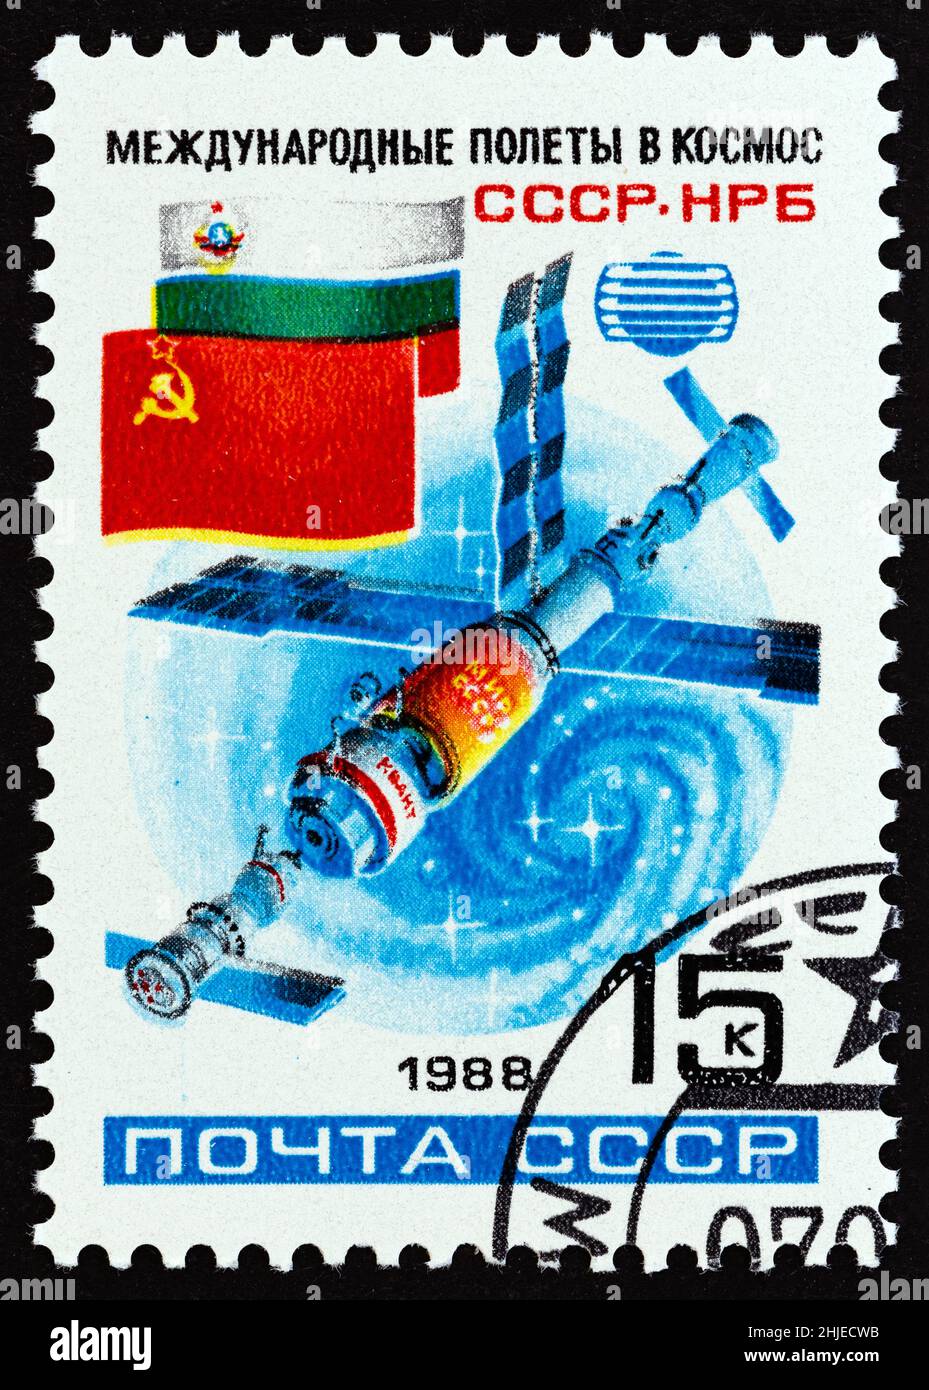 USSR - CIRCA 1988: A stamp printed in USSR issued for the Soviet-Bulgarian Space Flight shows SHIPKA-88, circa 1988. Stock Photo